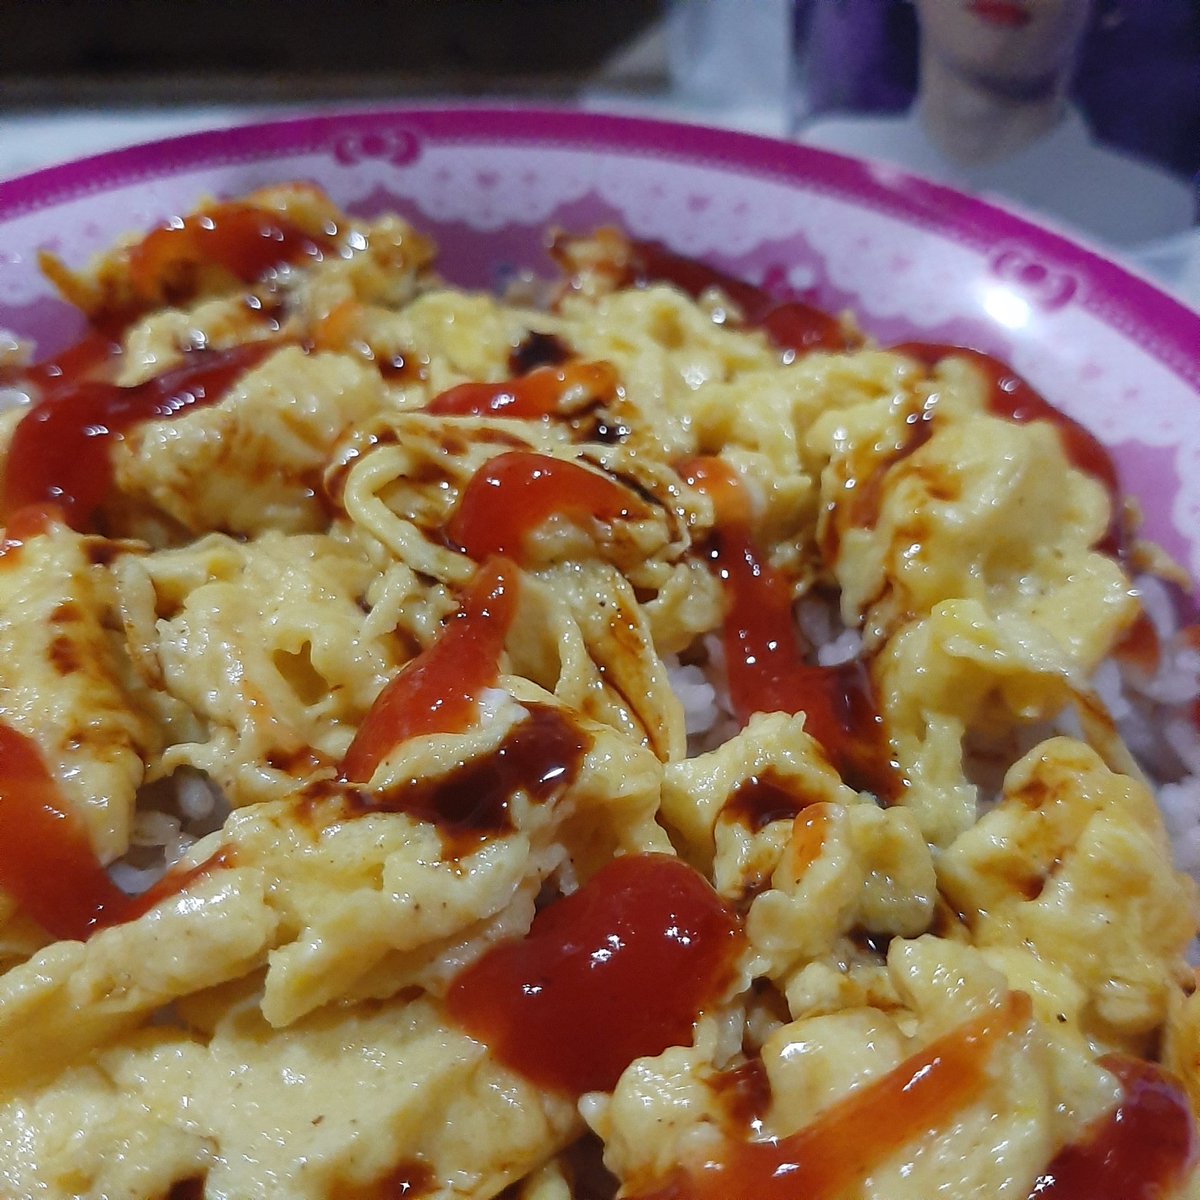 DAY #10 ㅡ 03/05 03:57 AMi made a rice bowl y'all well, its just scrambled eggs with rice and a lil bit of tomato sauce also soysauce, but idk im so happy